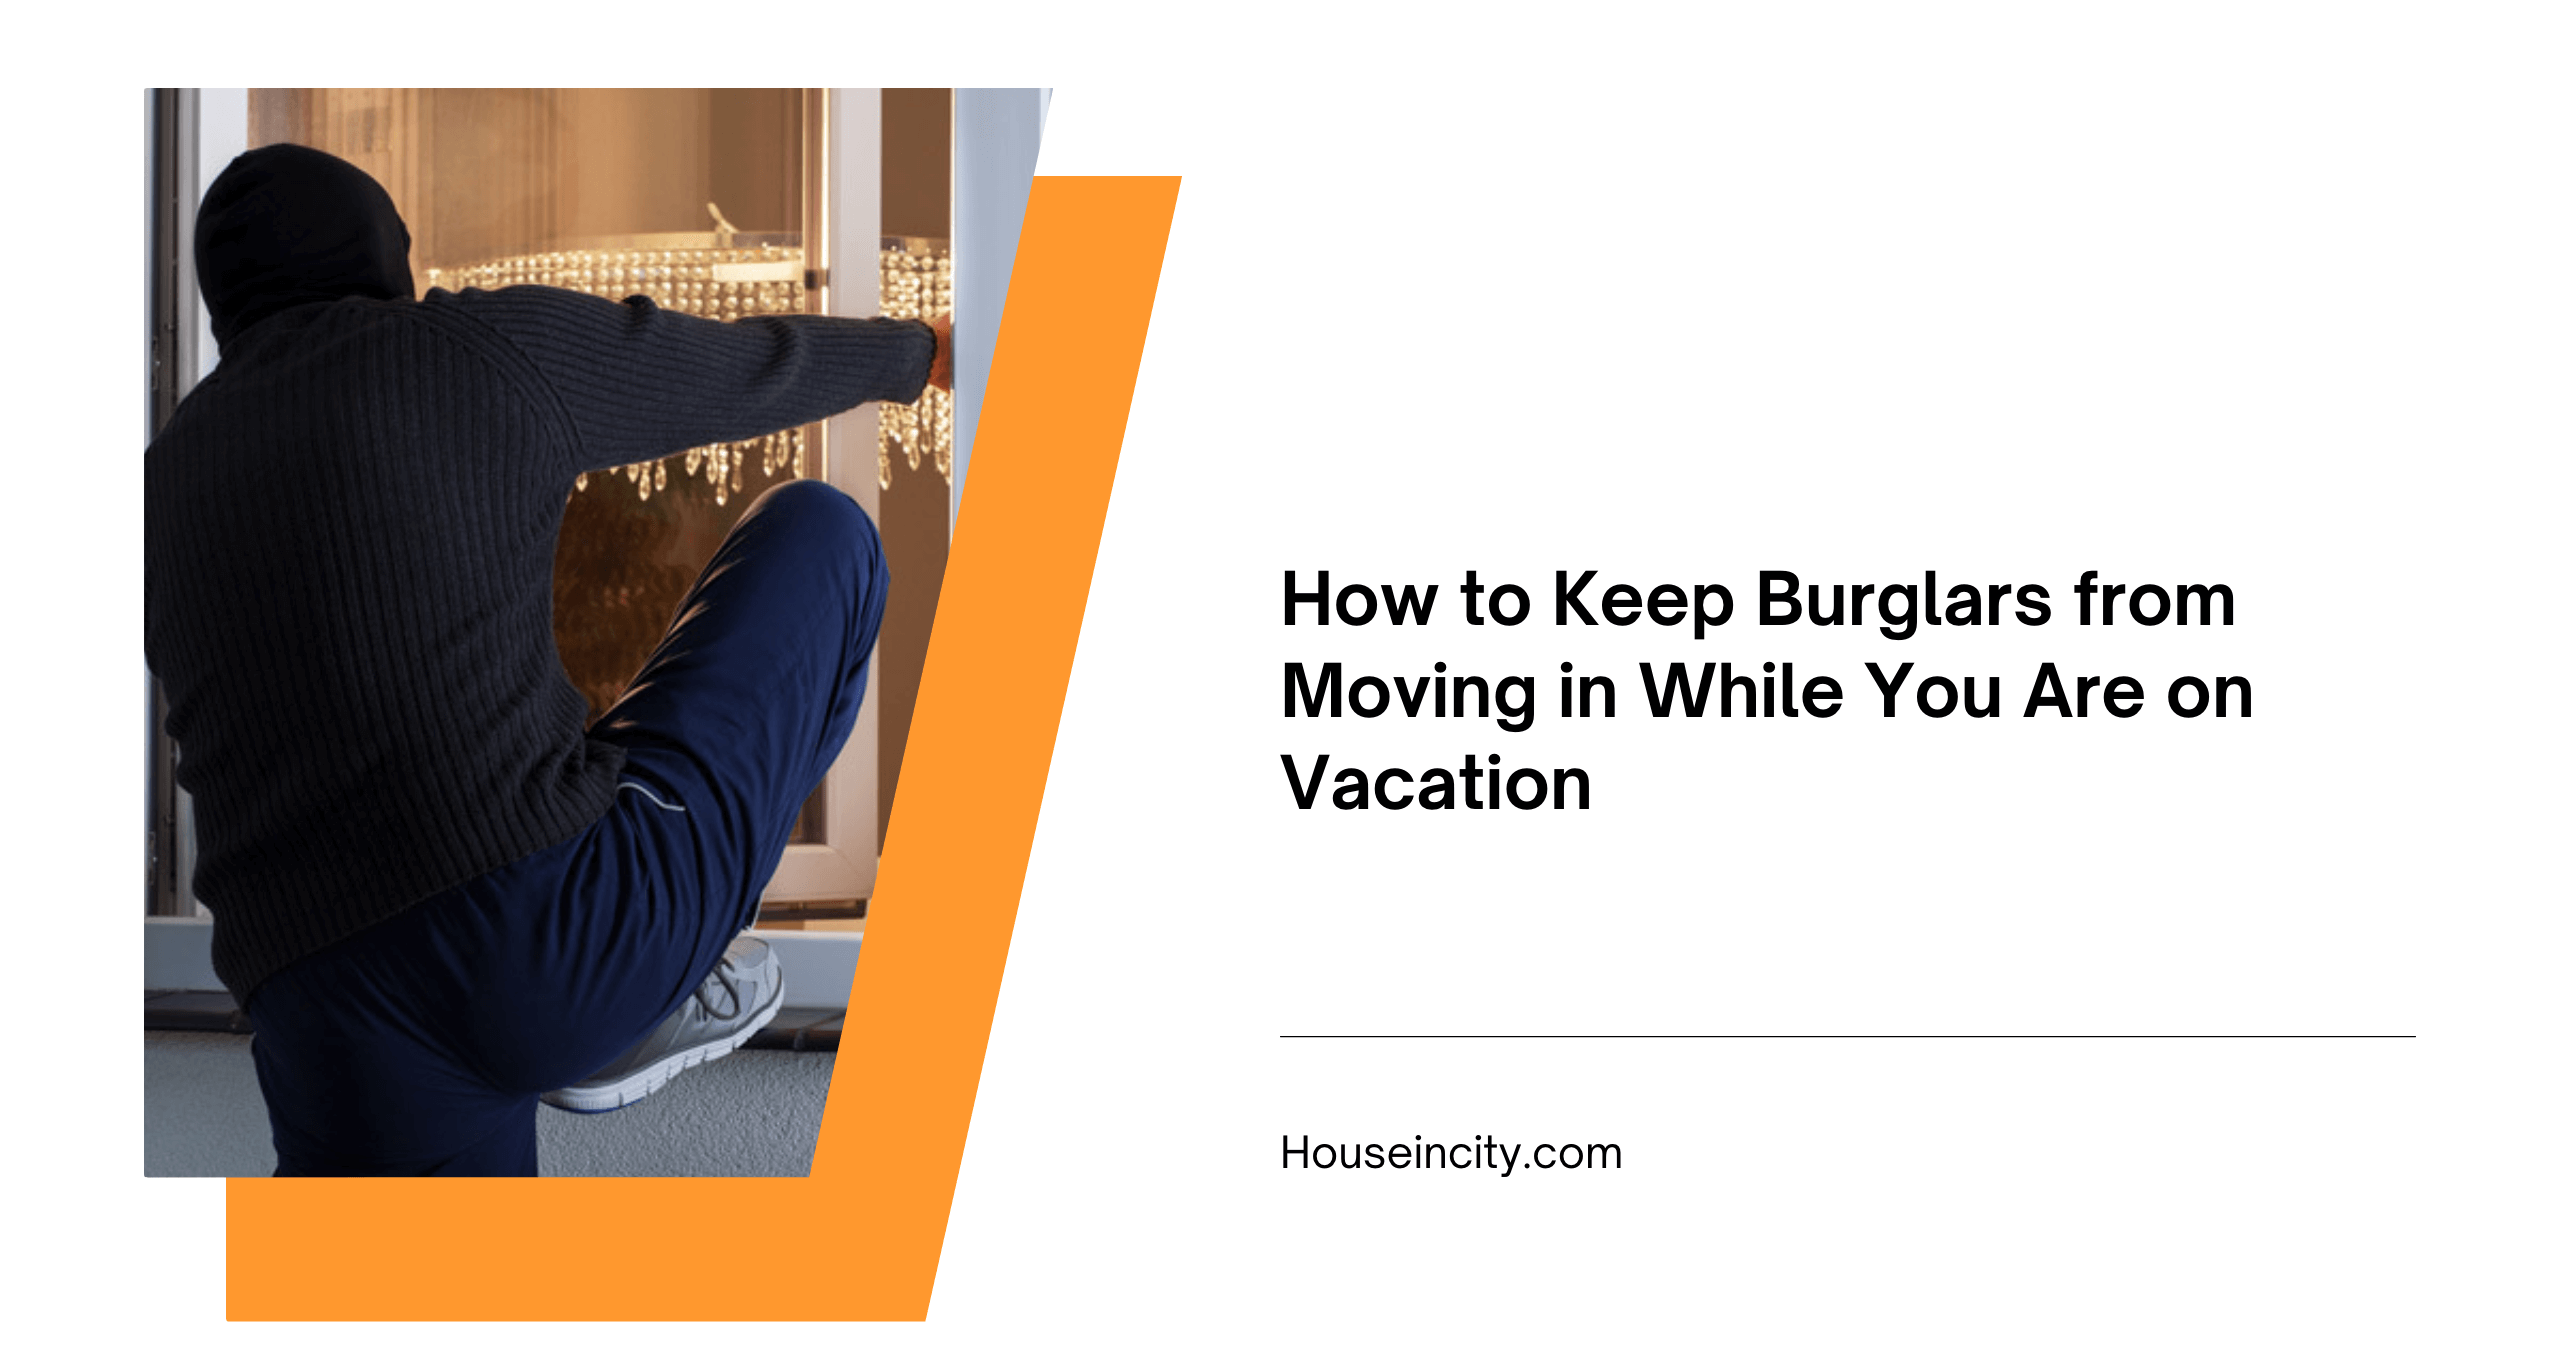 How to Keep Burglars from Moving in While You Are on Vacation